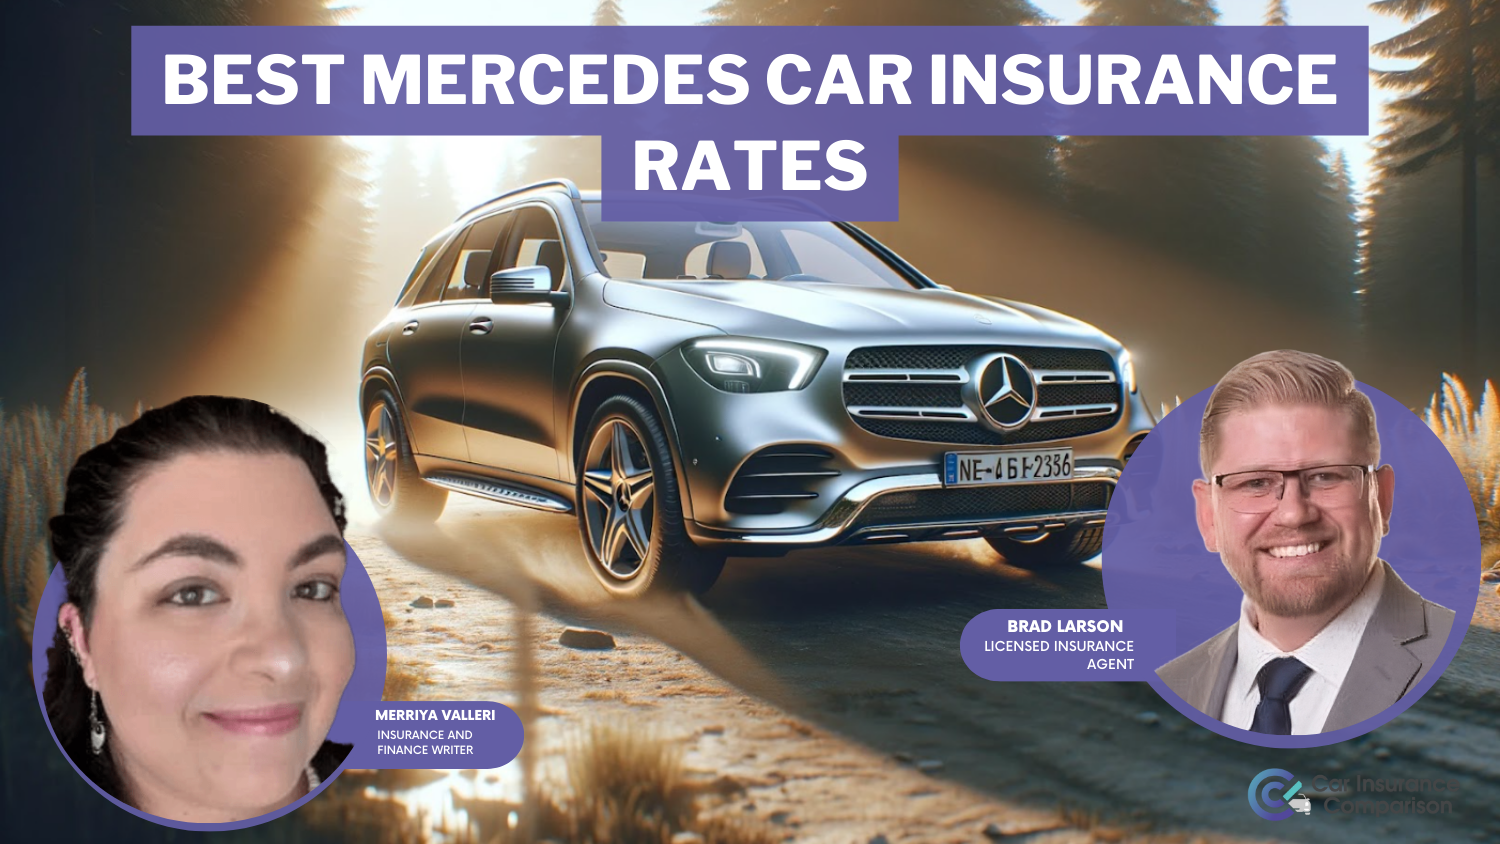 Best Mercedes Car Insurance Rates: Allstate, Geico, and Progressive